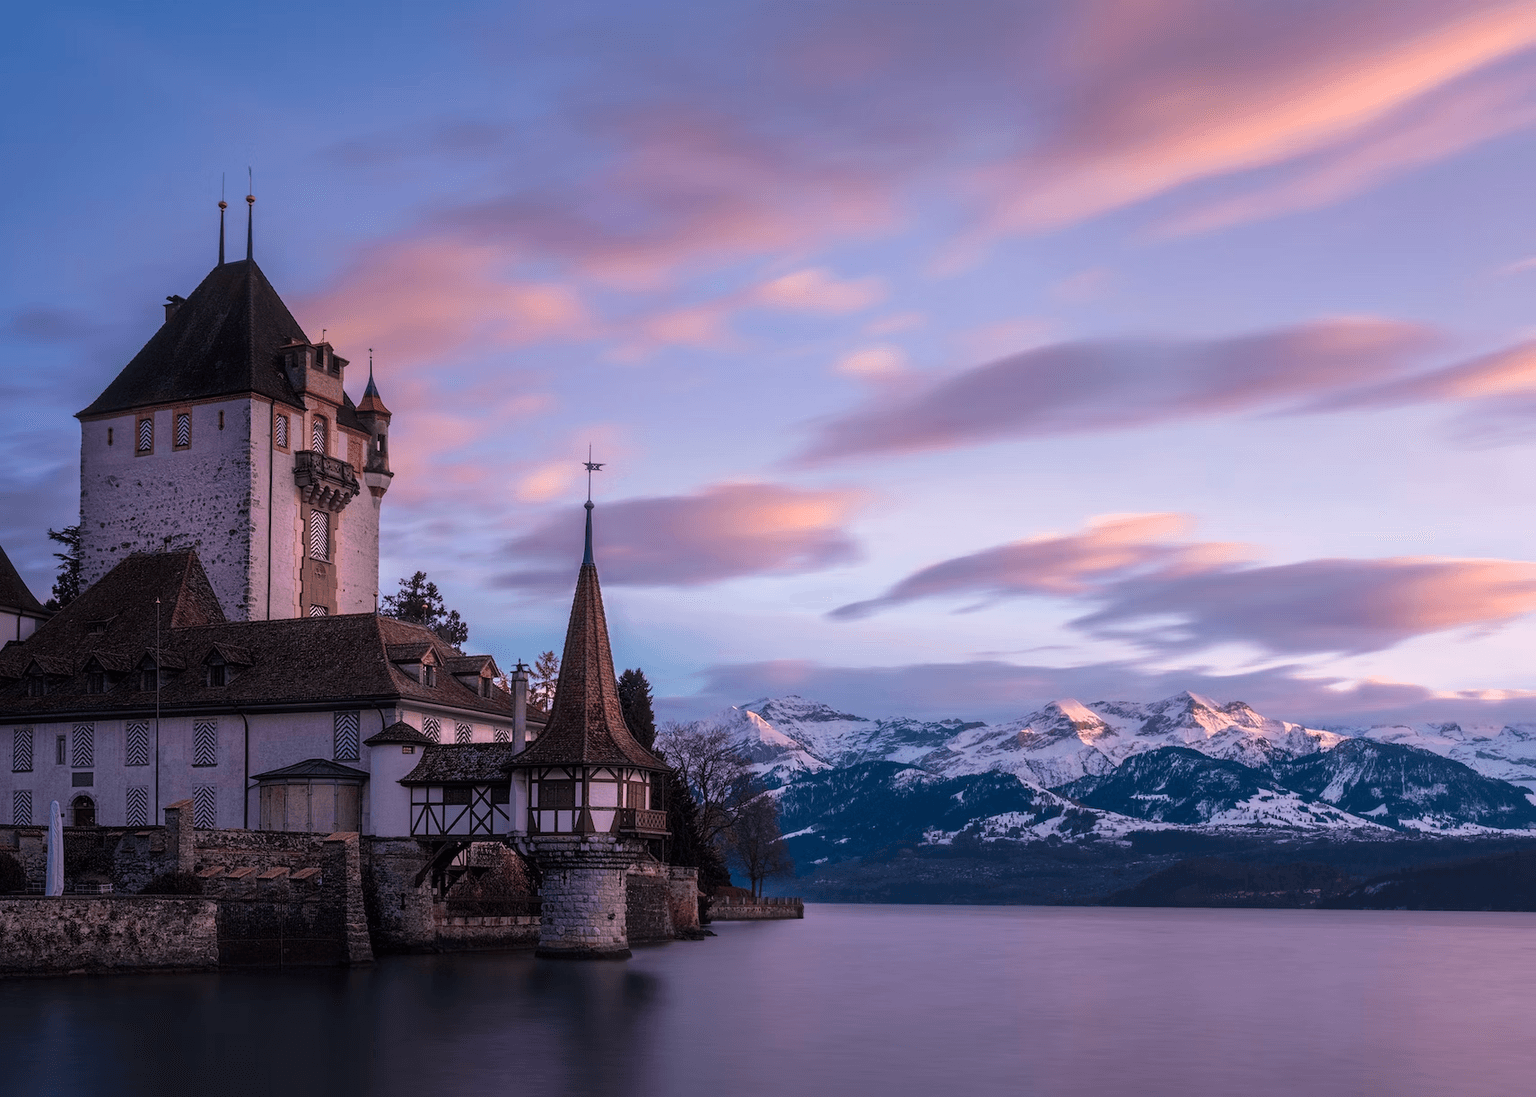 Castle at lake at sunset with mountains in background